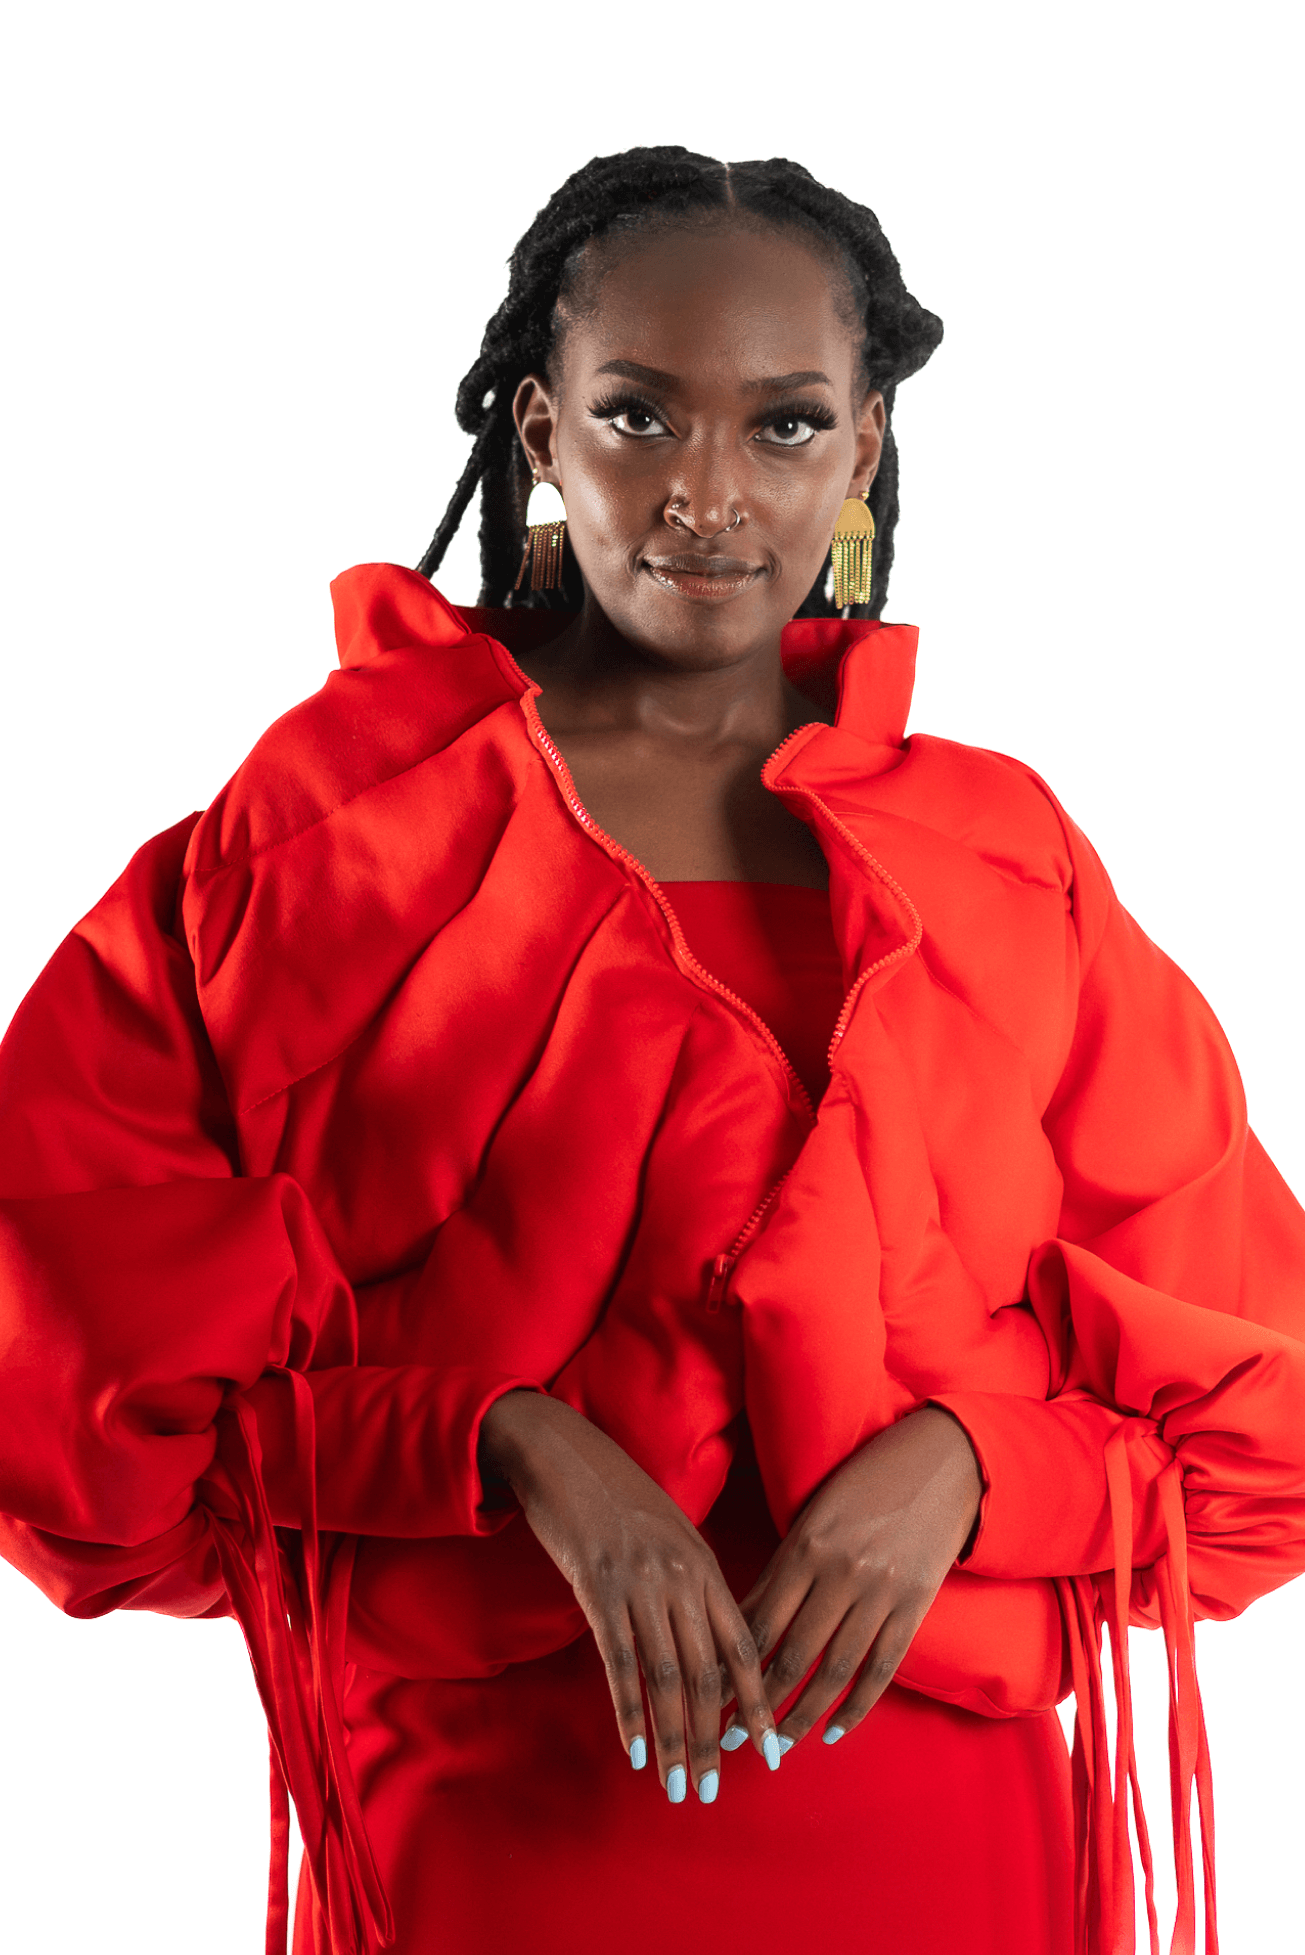 Shop Quilted Puffer Jacket by Eva Wambutu on Arrai. Discover stylish, affordable clothing, jewelry, handbags and unique handmade pieces from top Kenyan & African fashion brands prioritising sustainability and quality craftsmanship.